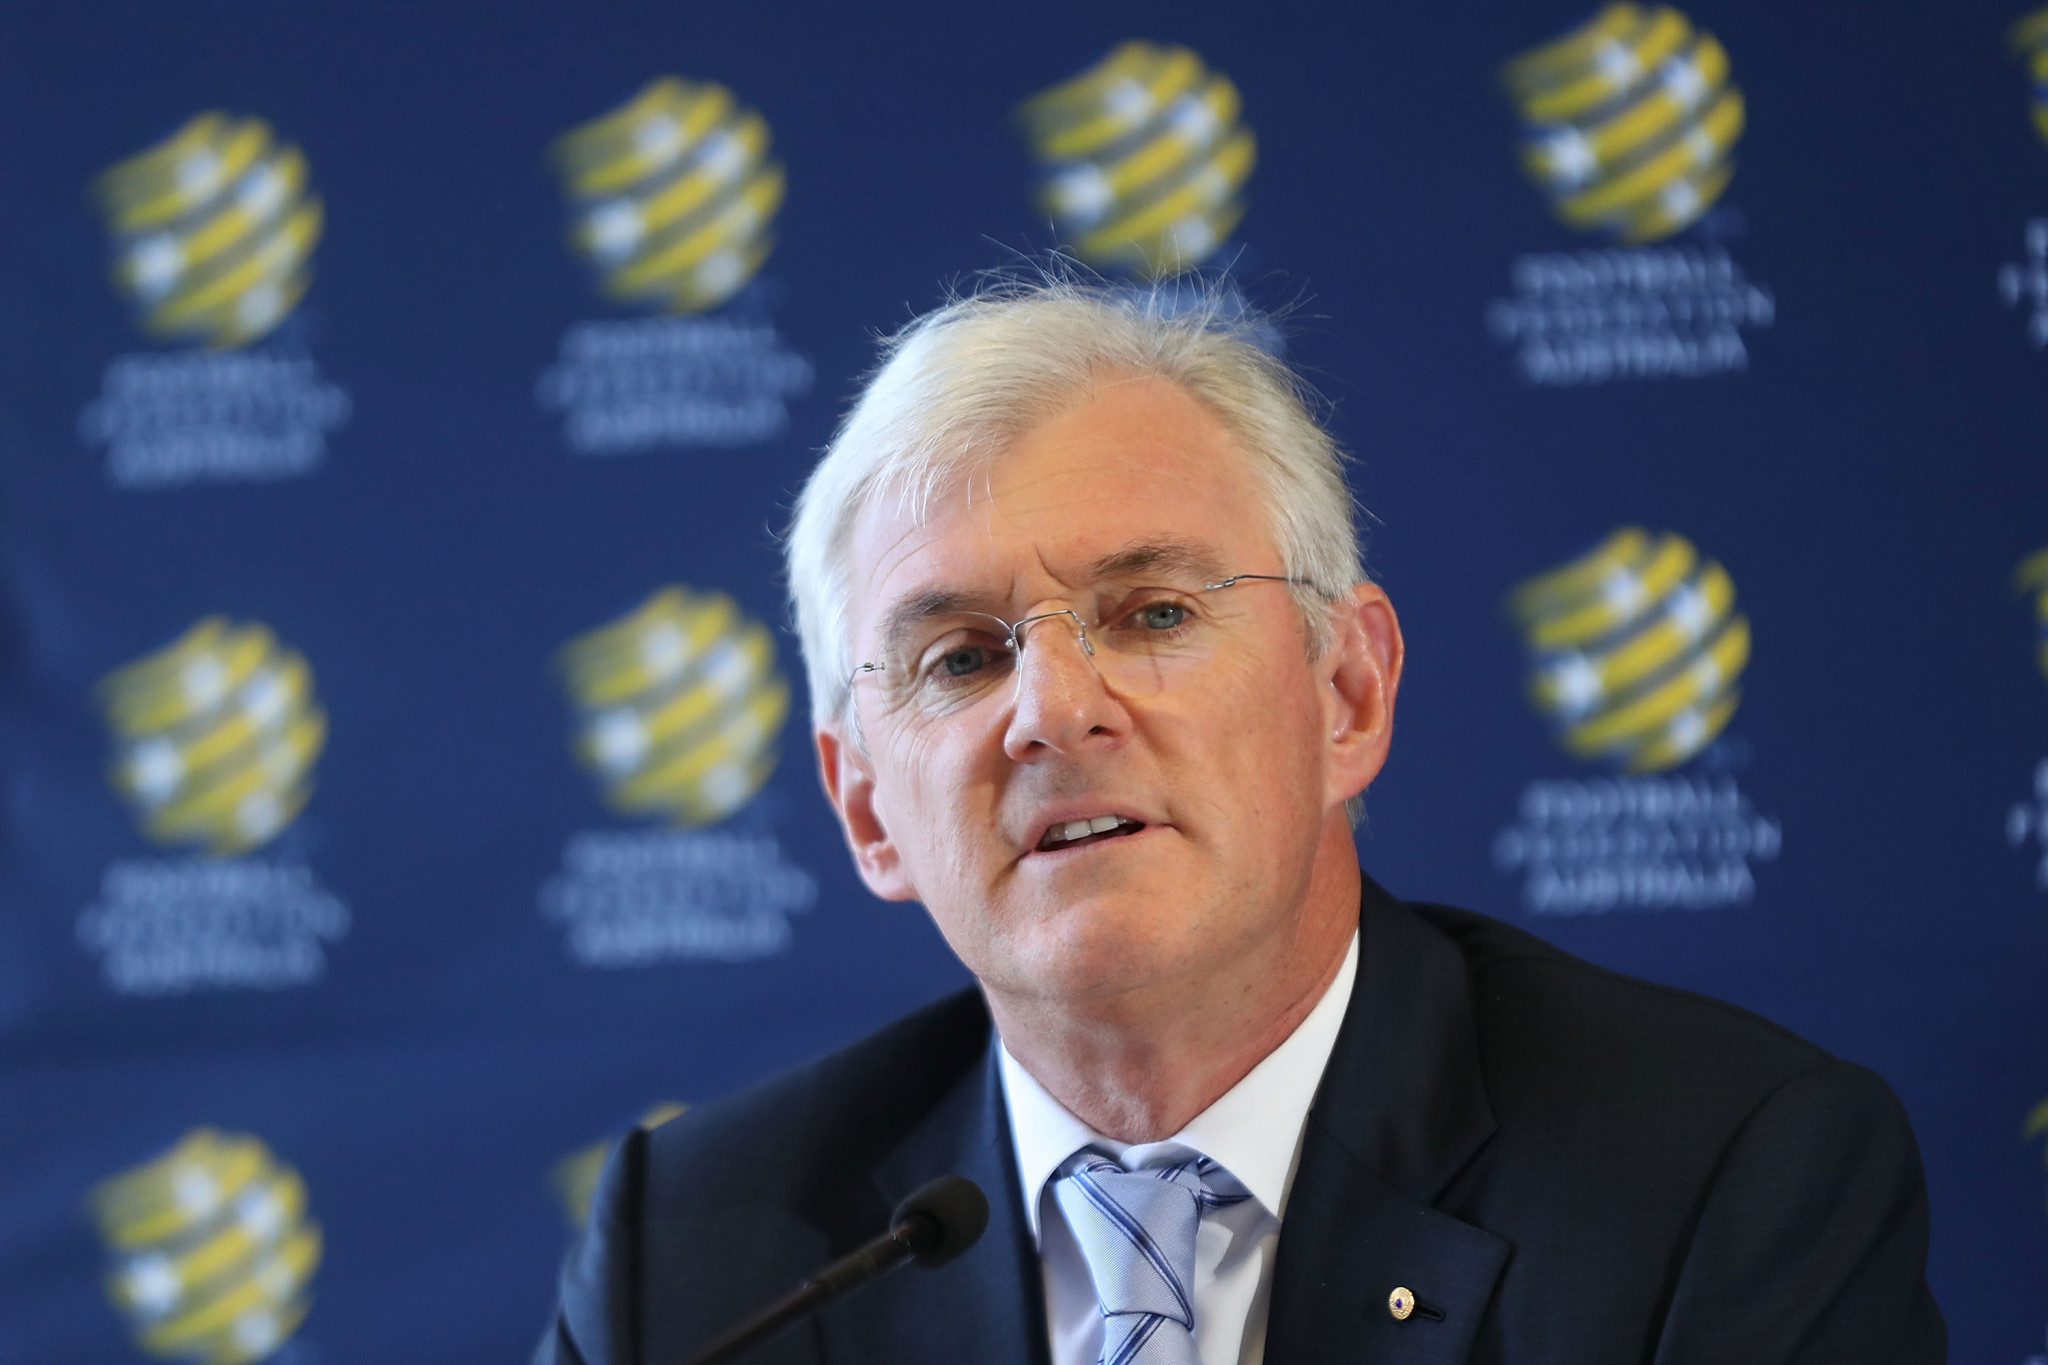 Football Federation Australia rejects "crucial aspects" of review into structure